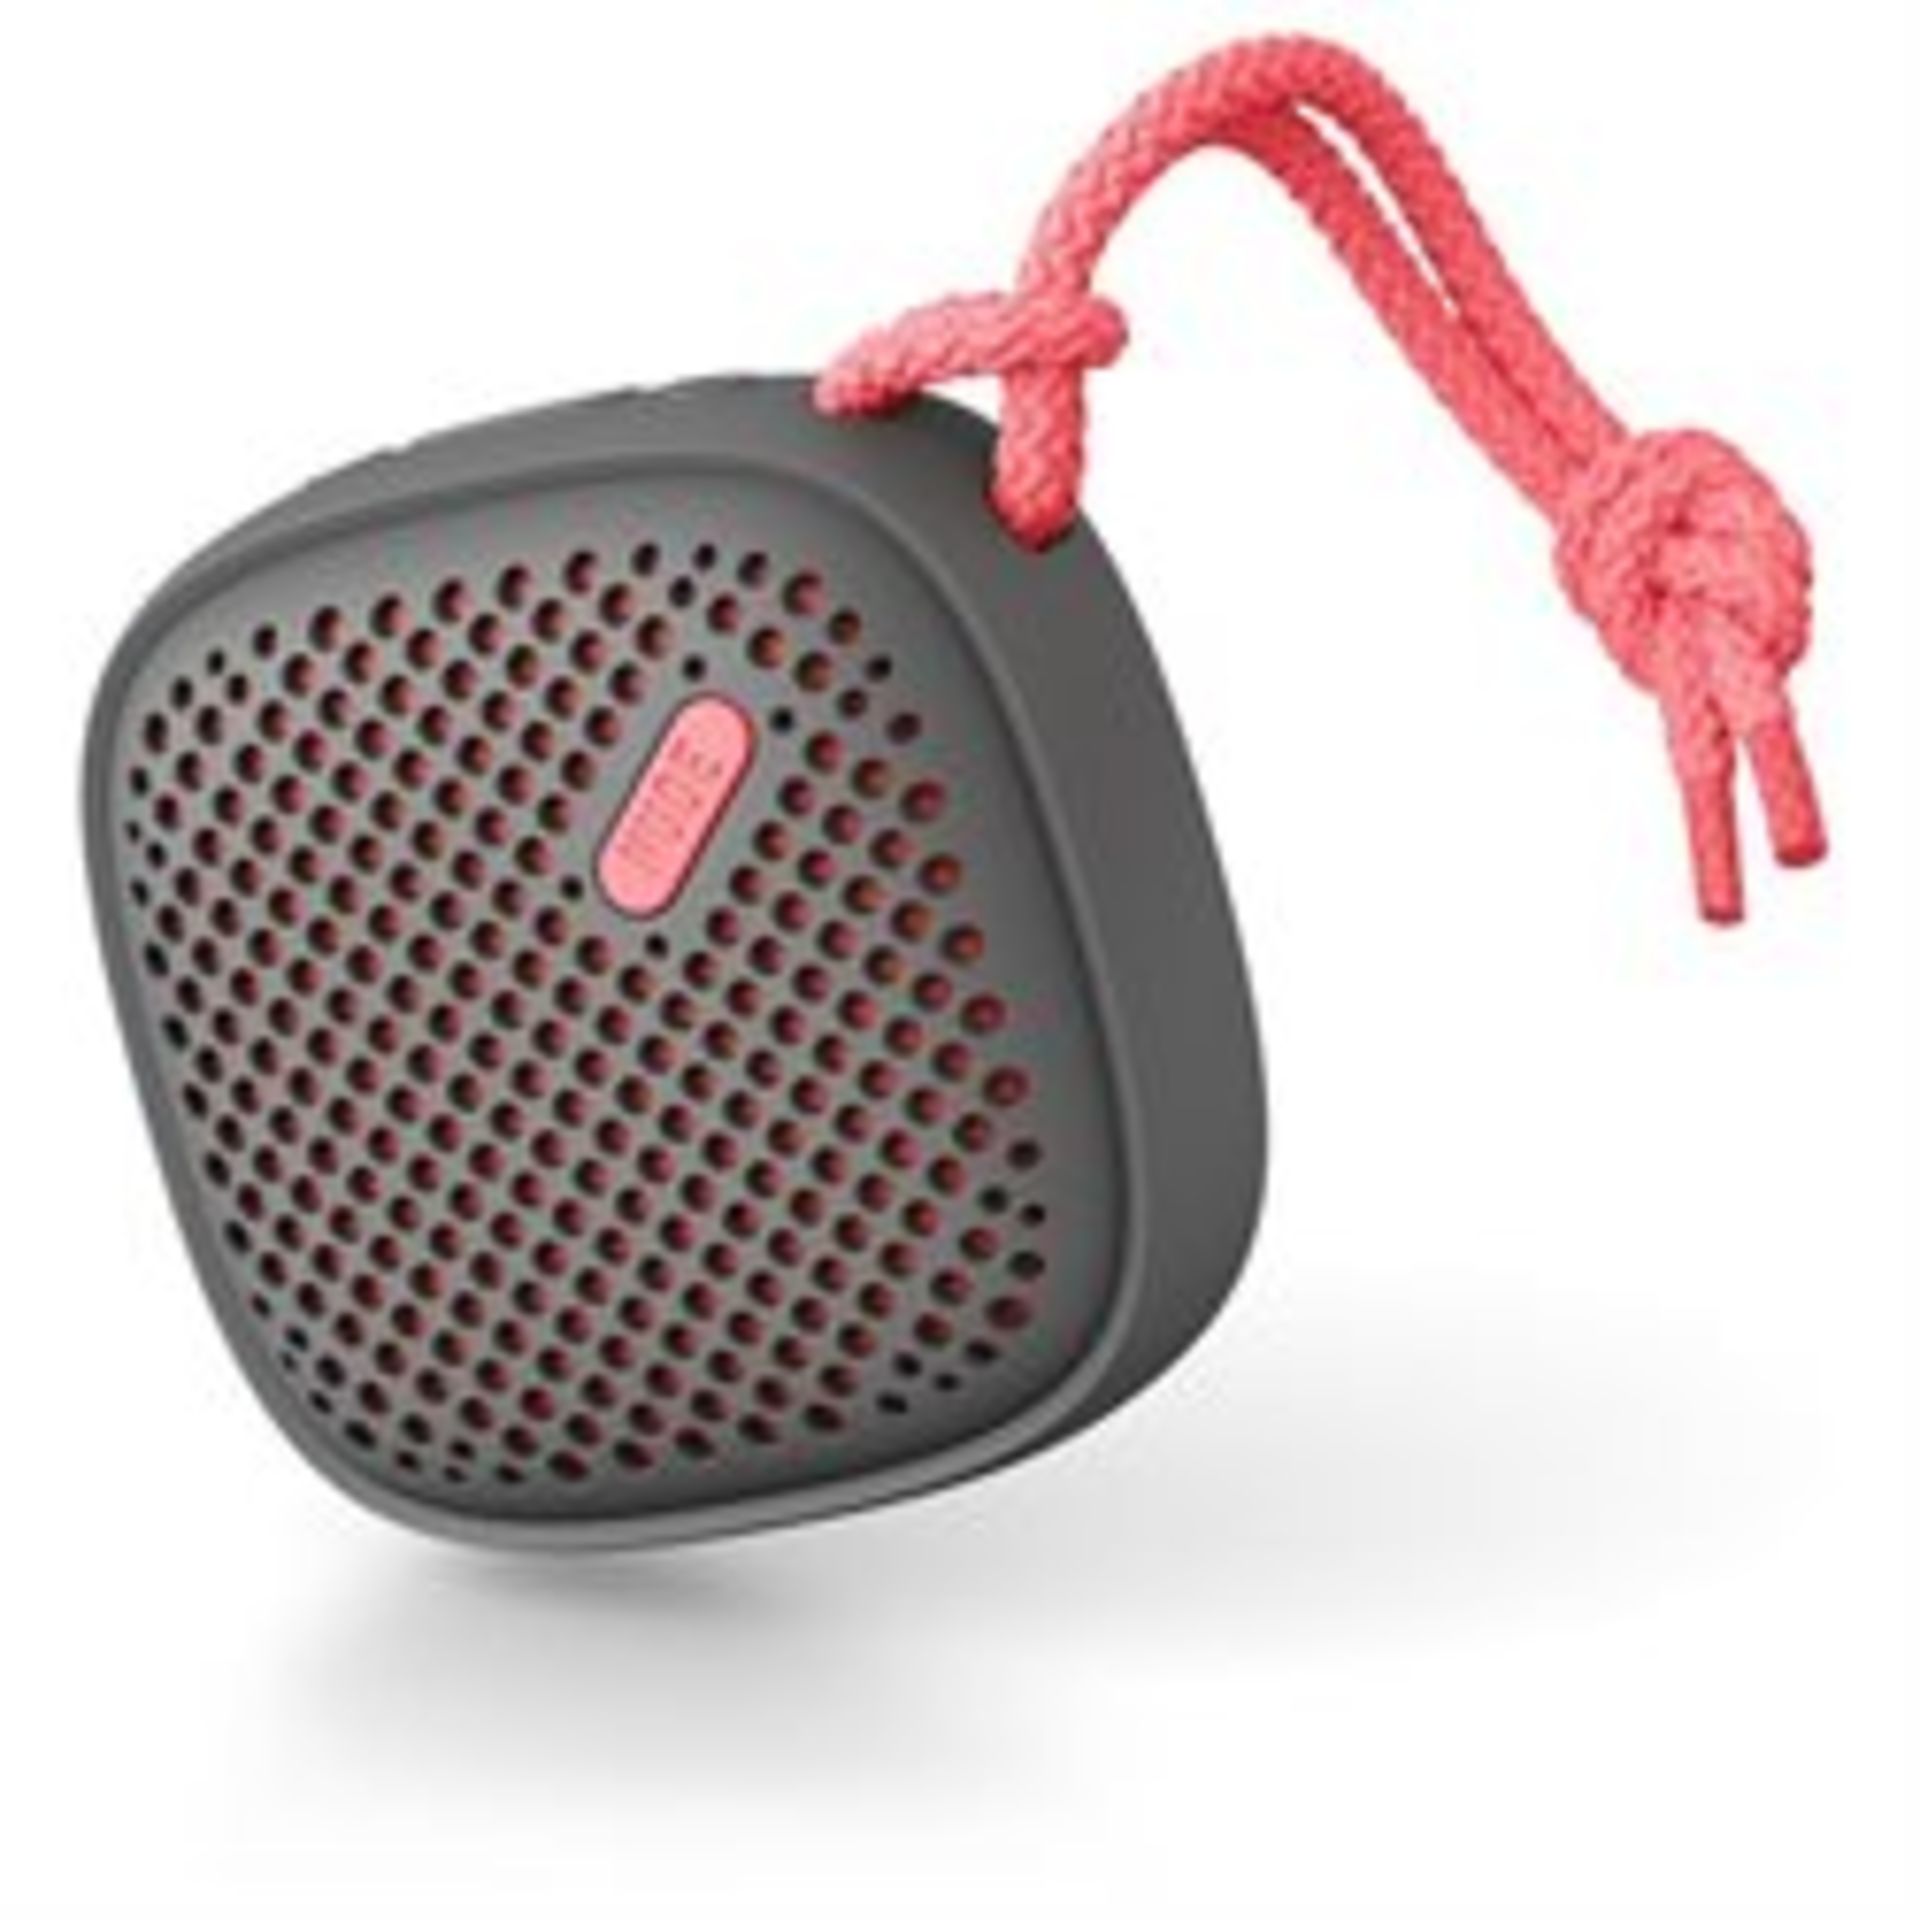 V Brand New NudeAudio Move S Universal Portable Wireless Bluetooth Speaker Charcol/Coral ISP £29.99